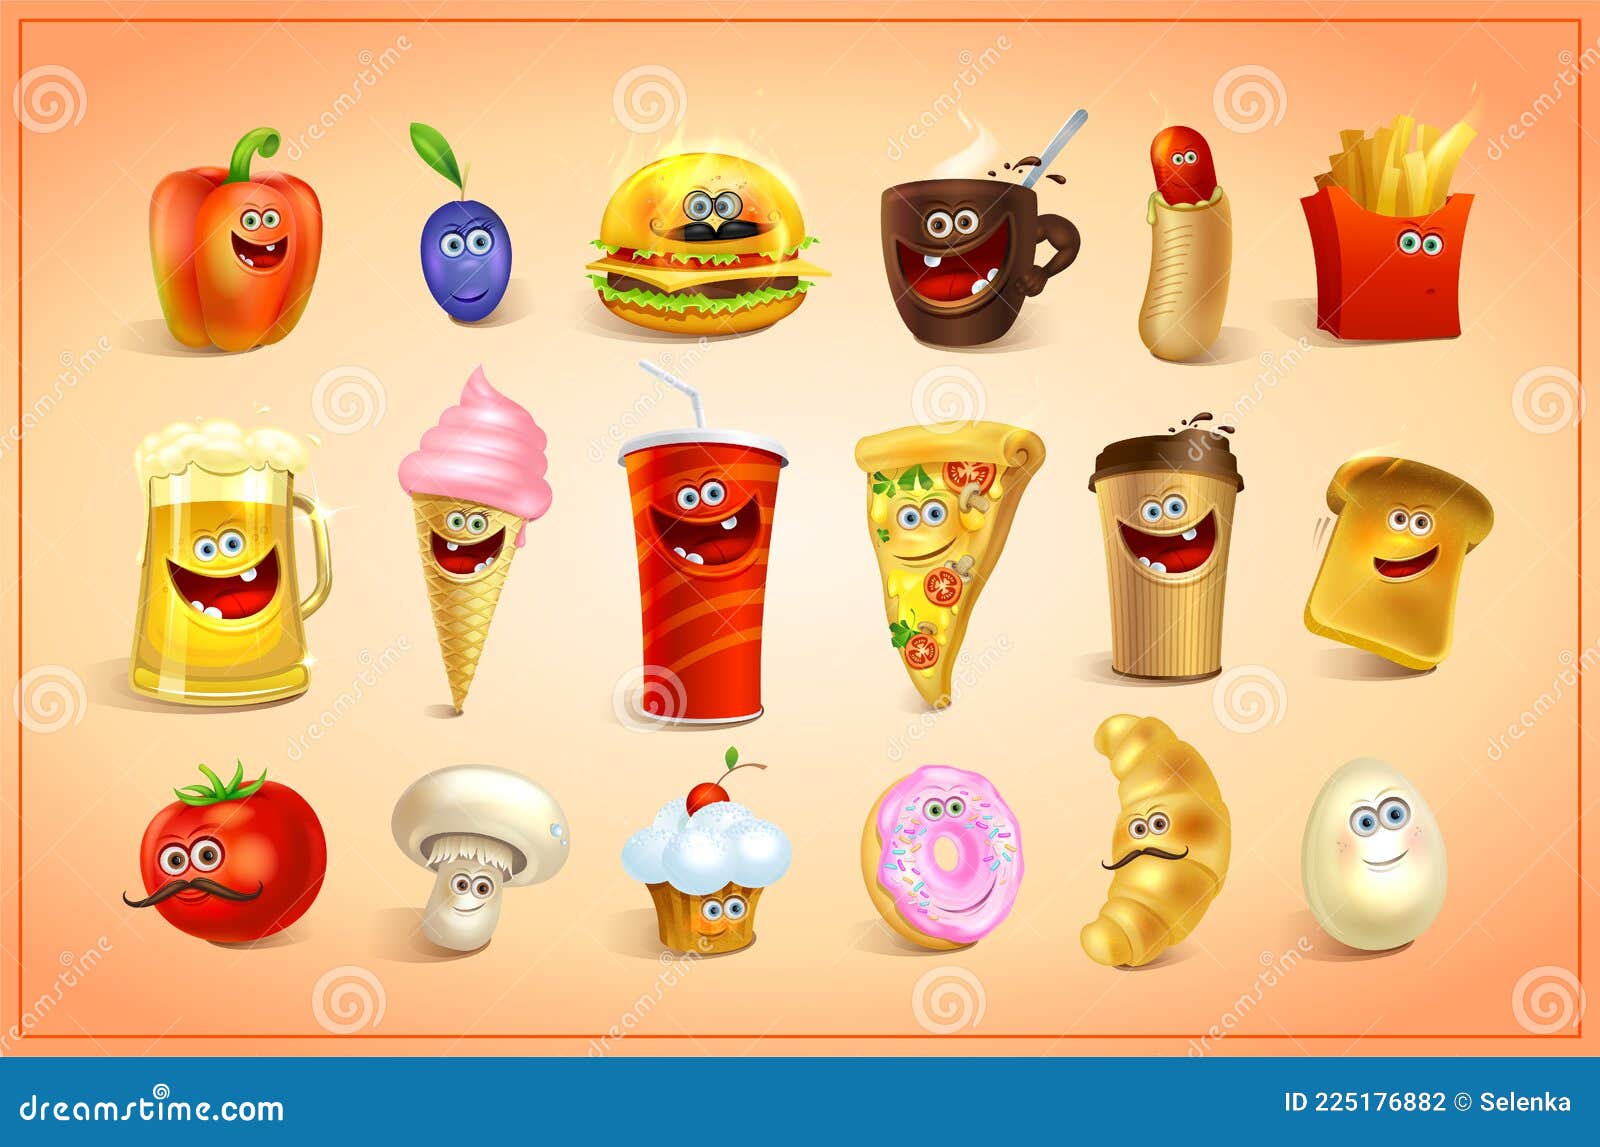 18 Funny Cartoon Food Icons Set - Sweets, Drinks and Fast Food Characters  Stock Vector - Illustration of face, cake: 225176882